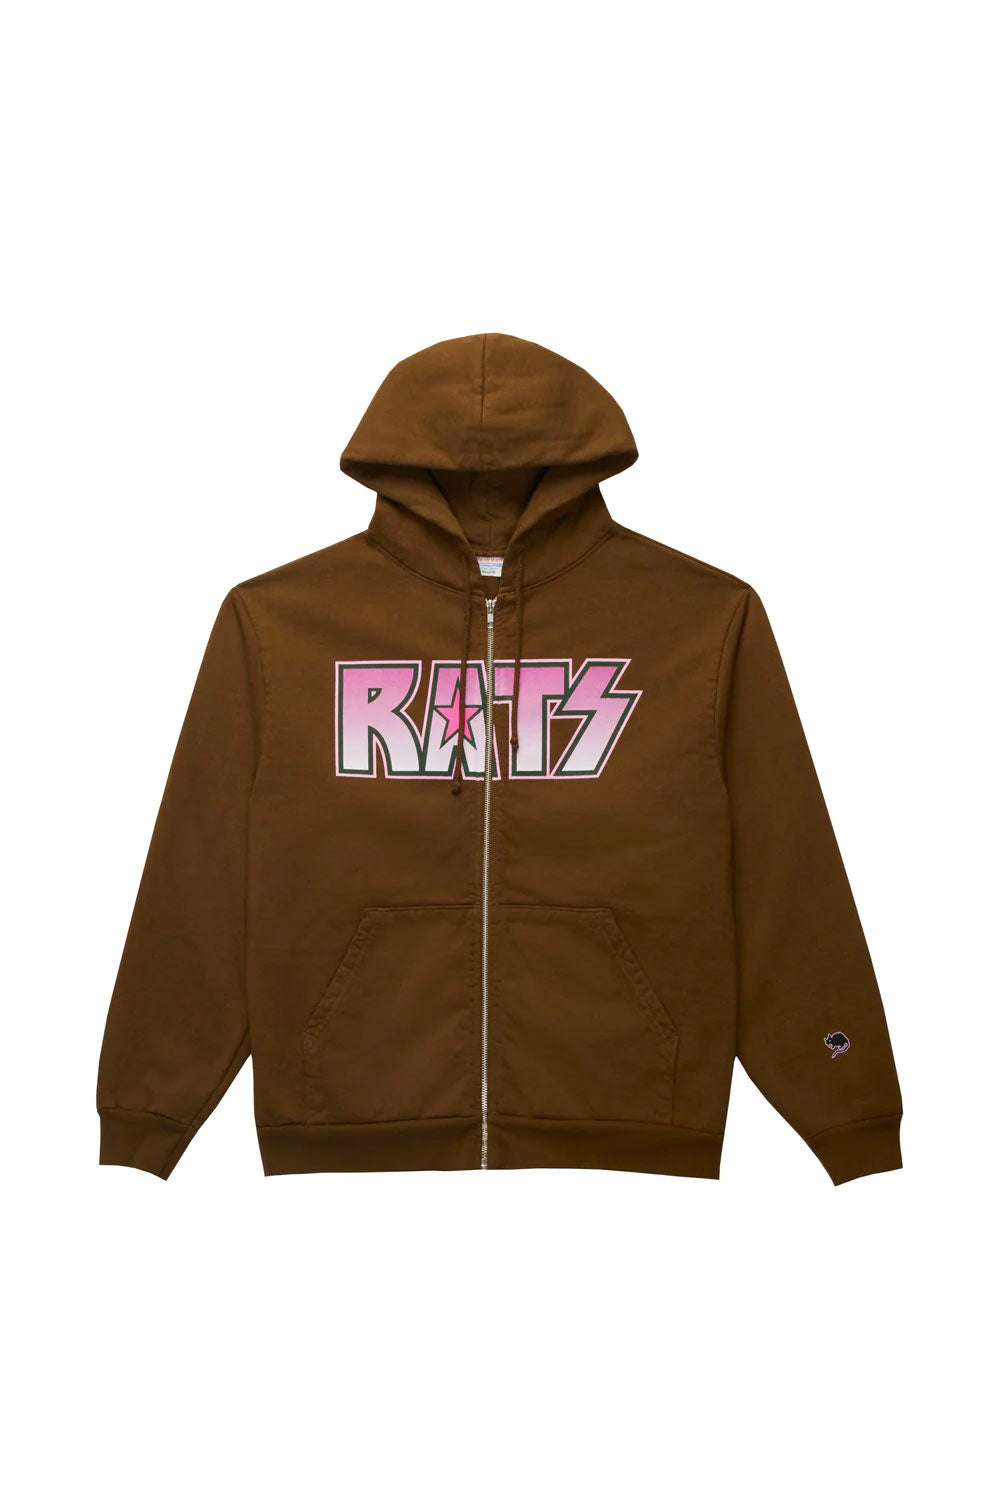 The STRAY RATS -  RATSTAR ZIP UP HOODIE  available online with global shipping, and in PAM Stores Melbourne and Sydney.